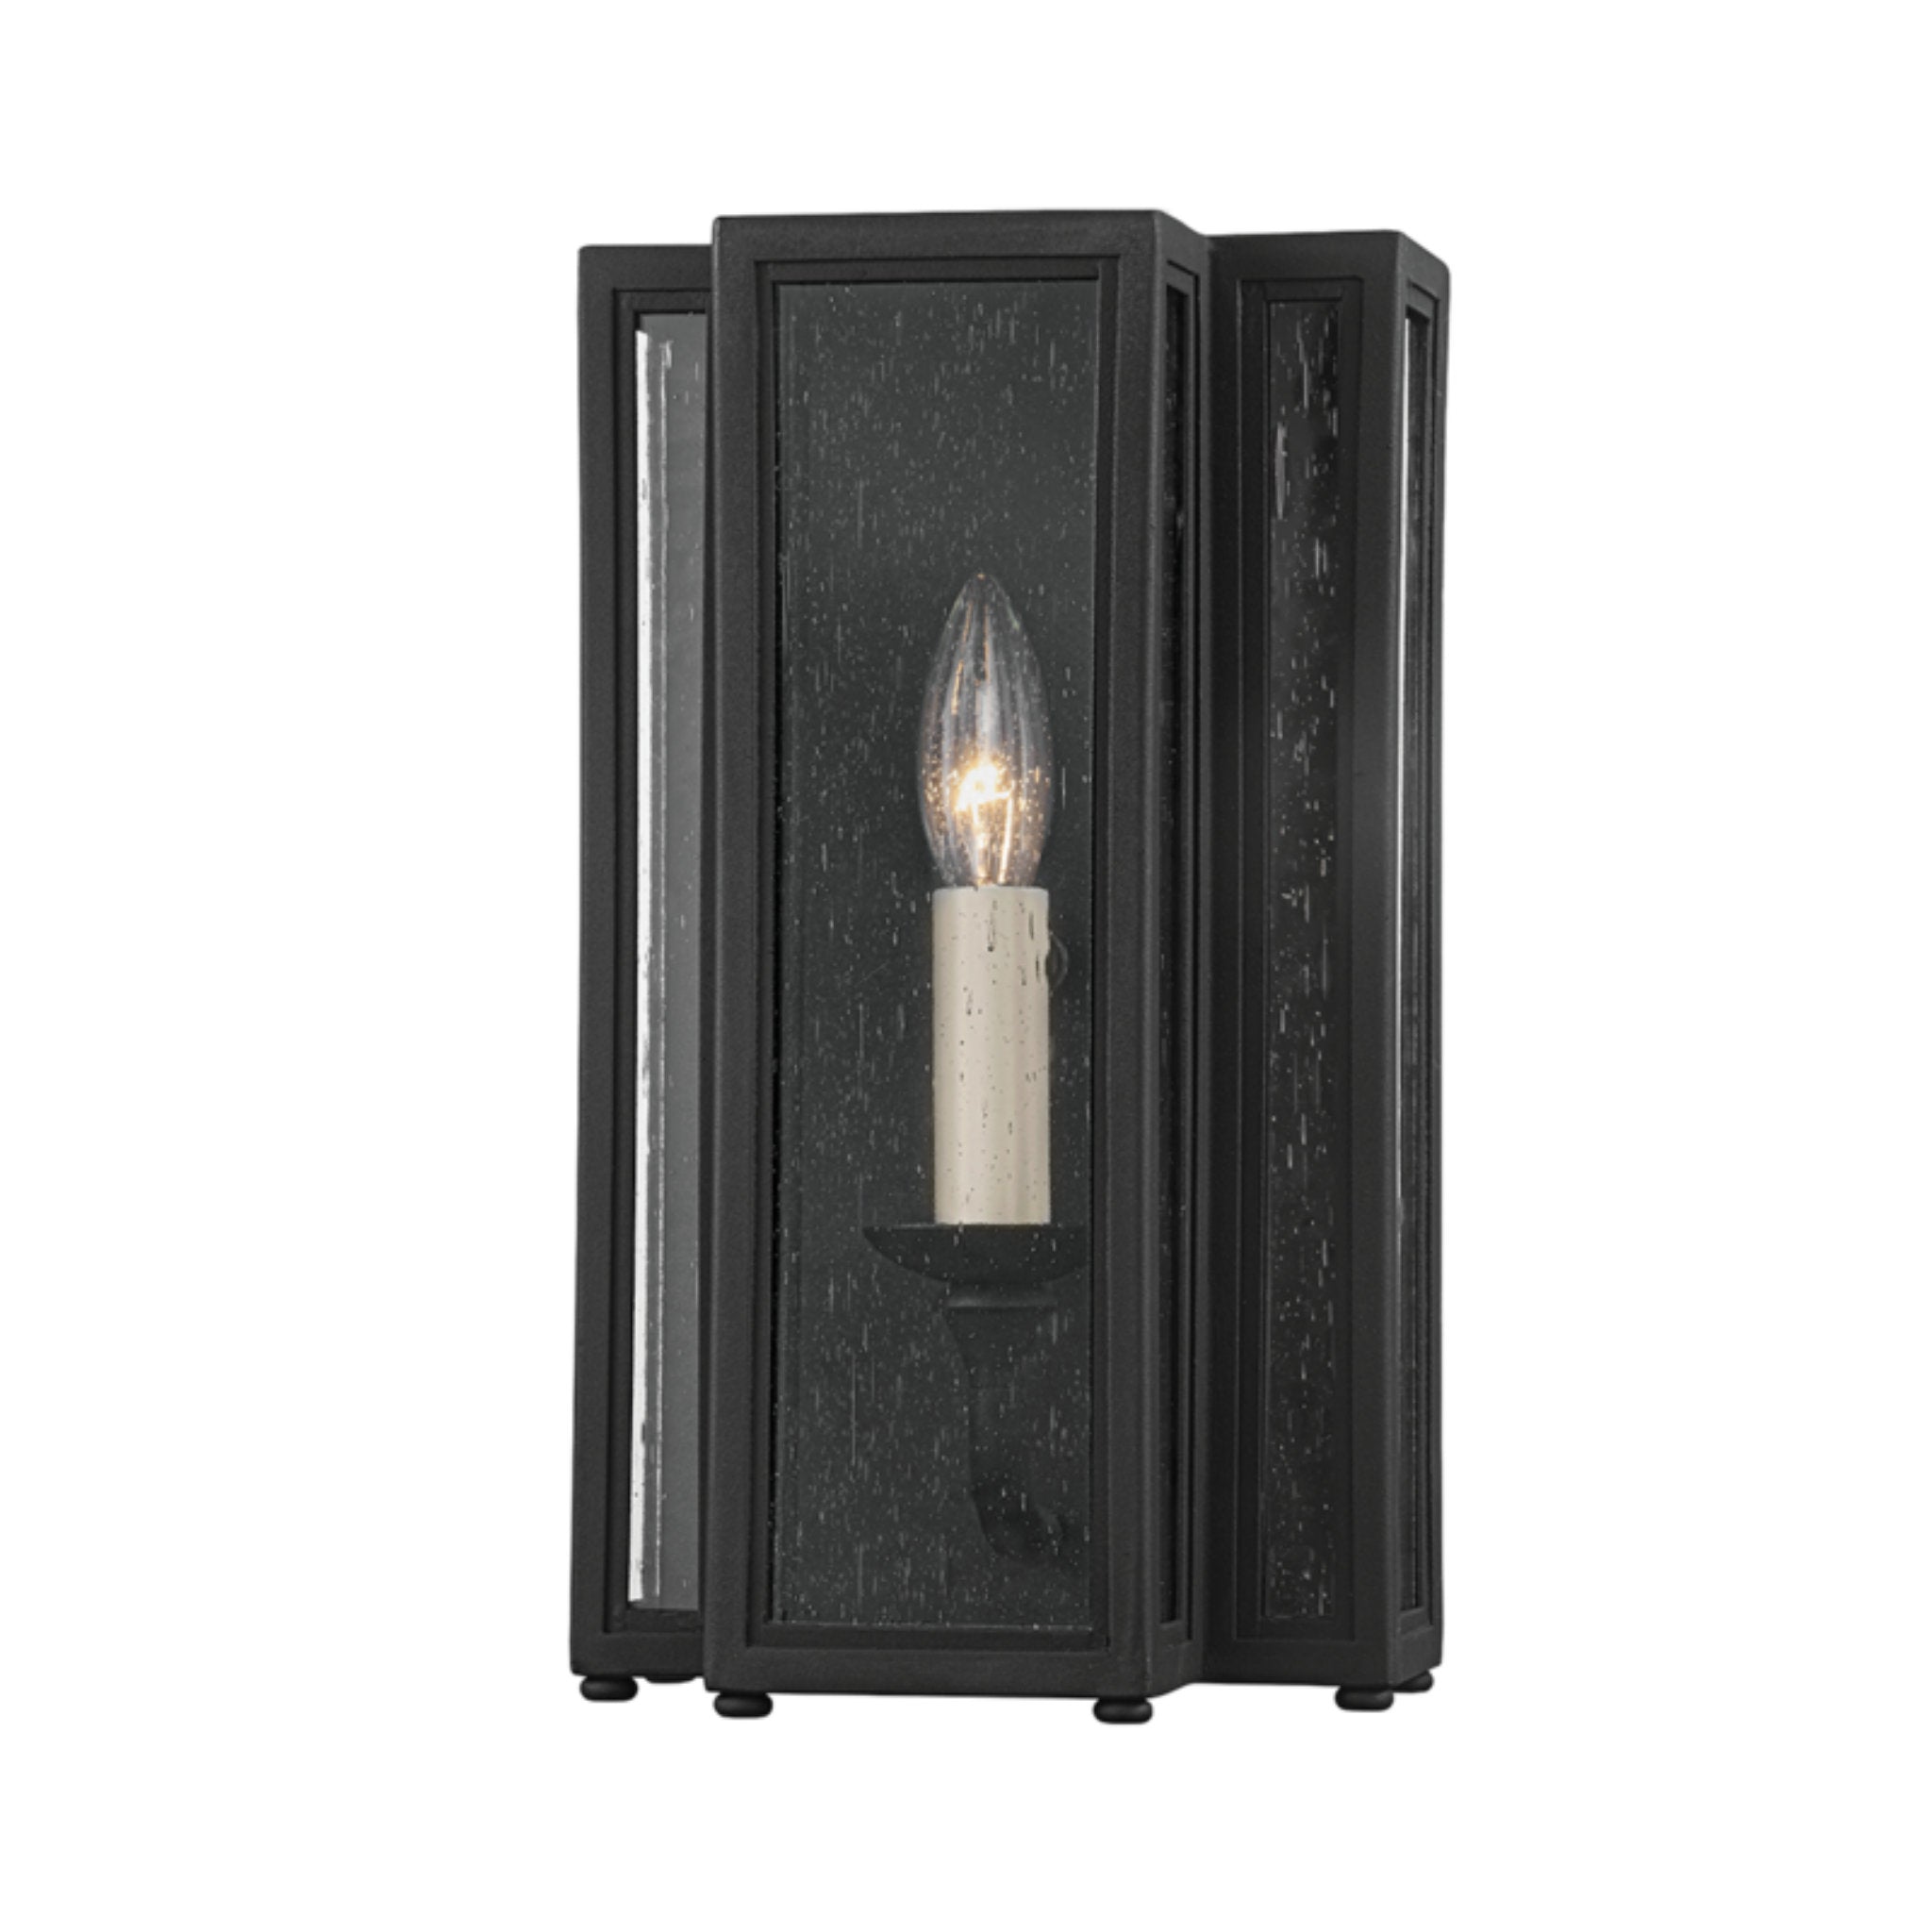 Leor 1 Light Wall Sconce in Textured Black